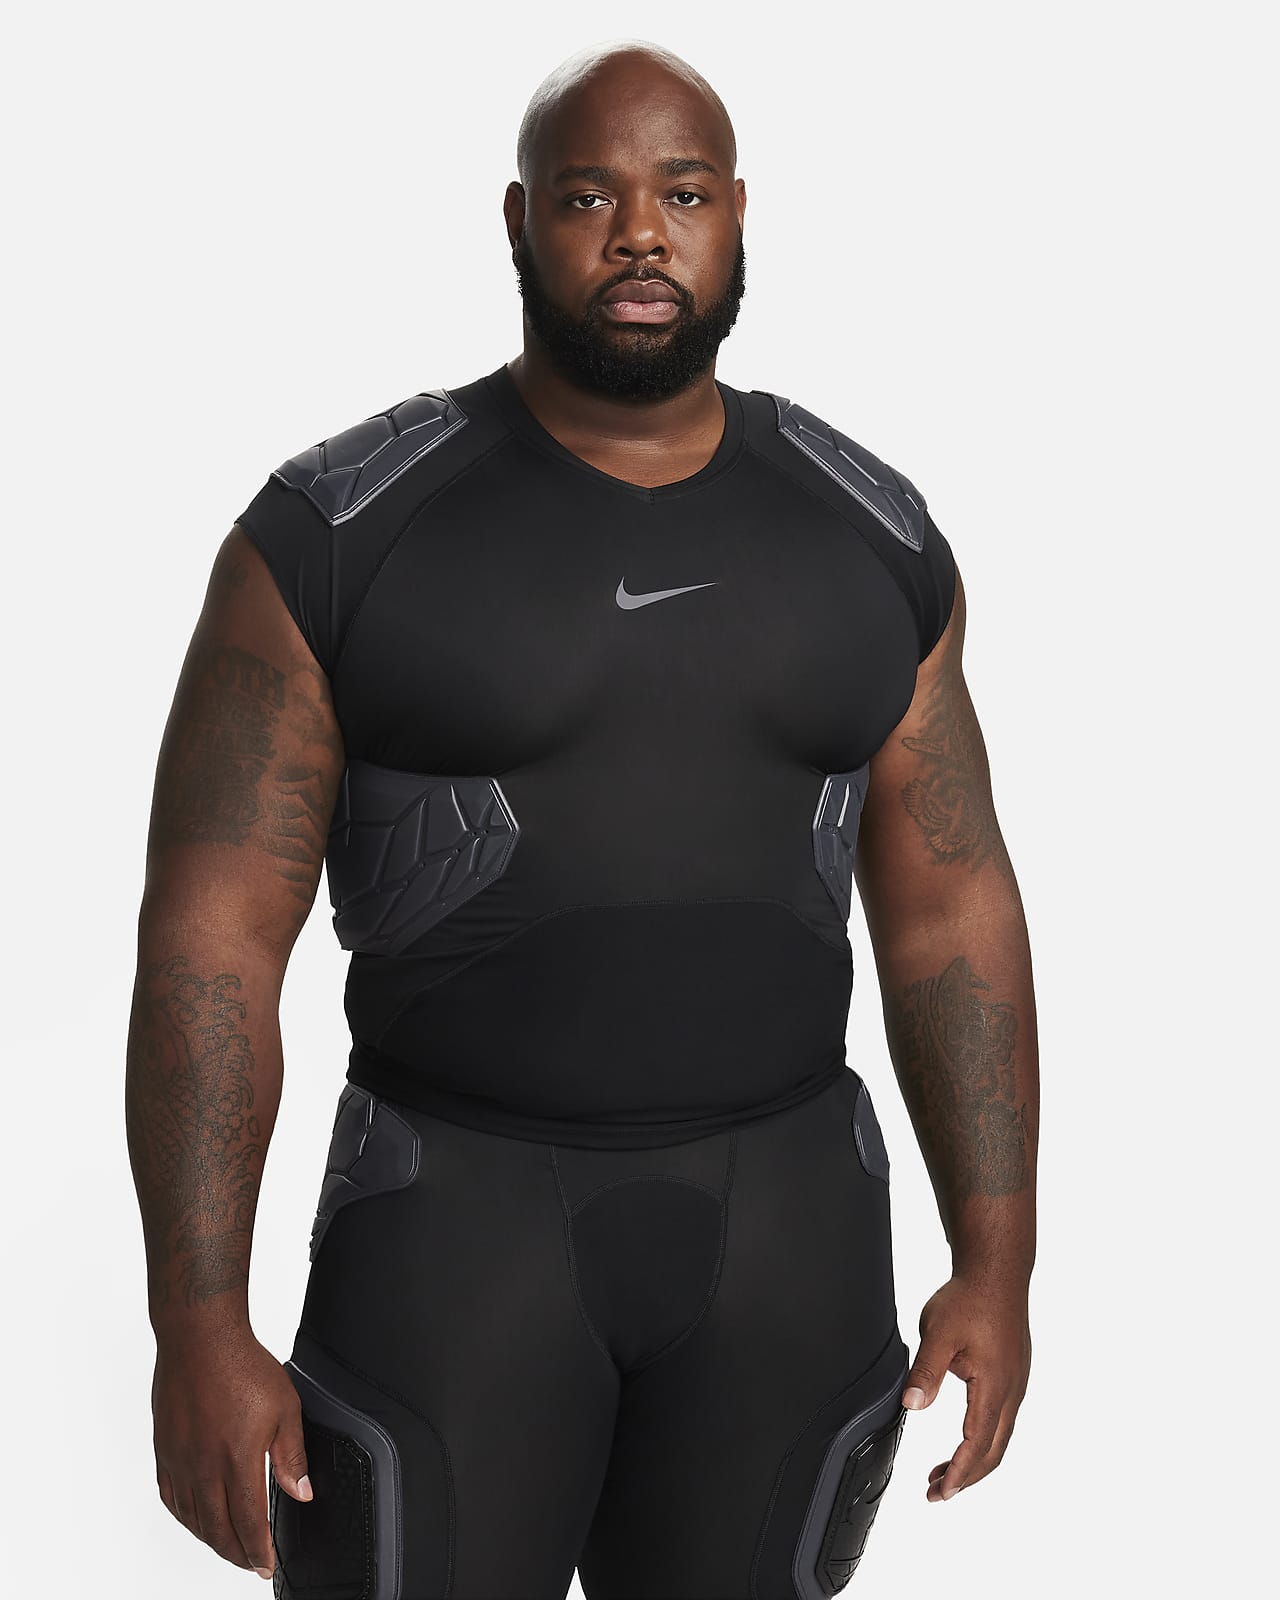 Nike Pro HyperStrong Men's 4-Pad Top.